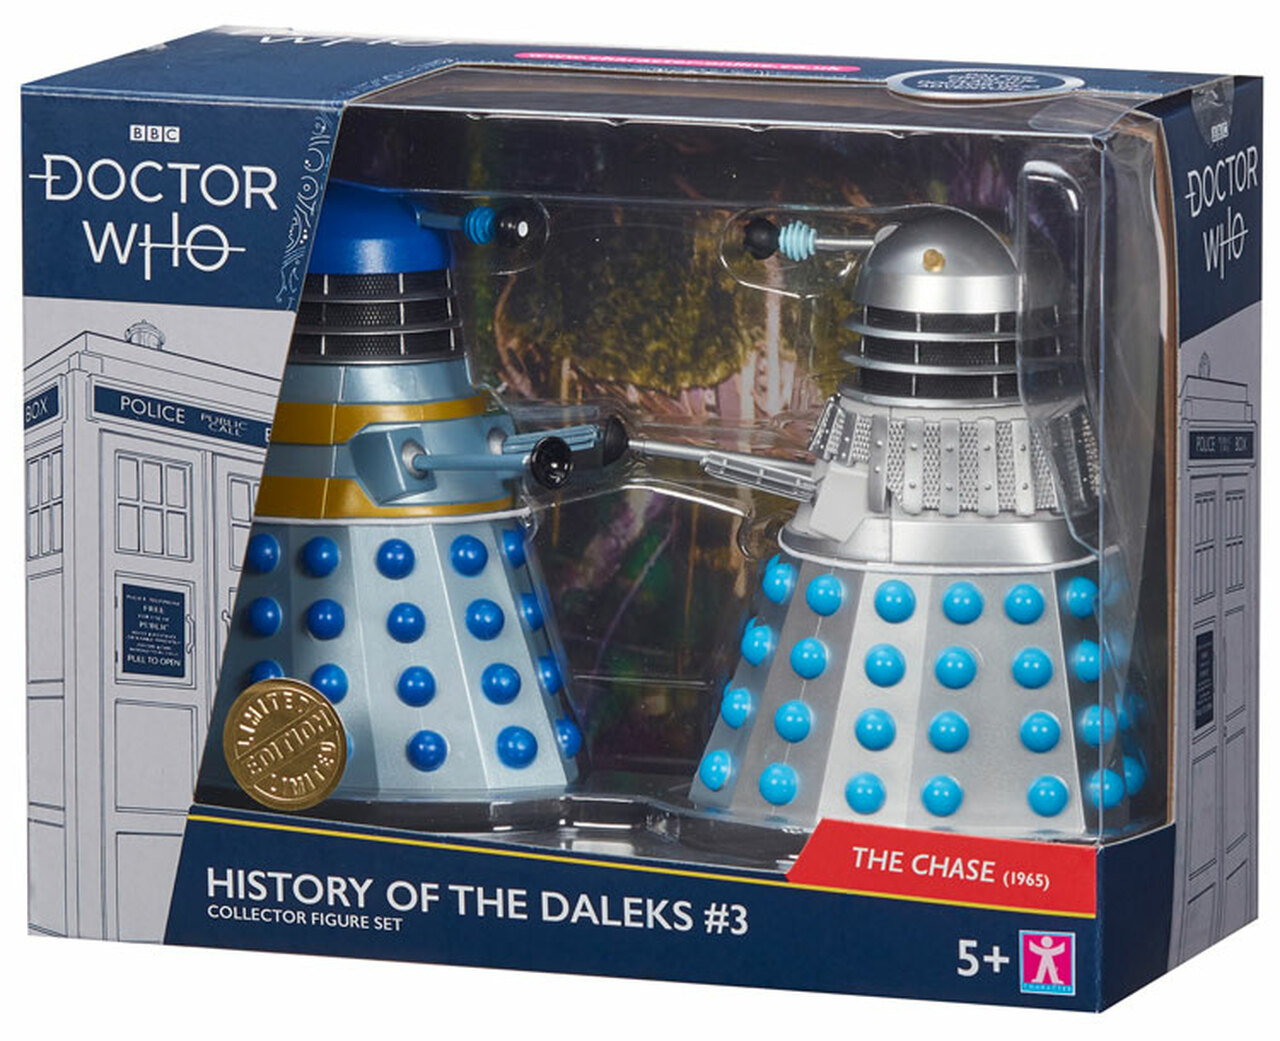 Doctor Who History of The Daleks #3 Collector Figure Set The Chase DAMAGED PACKAGING